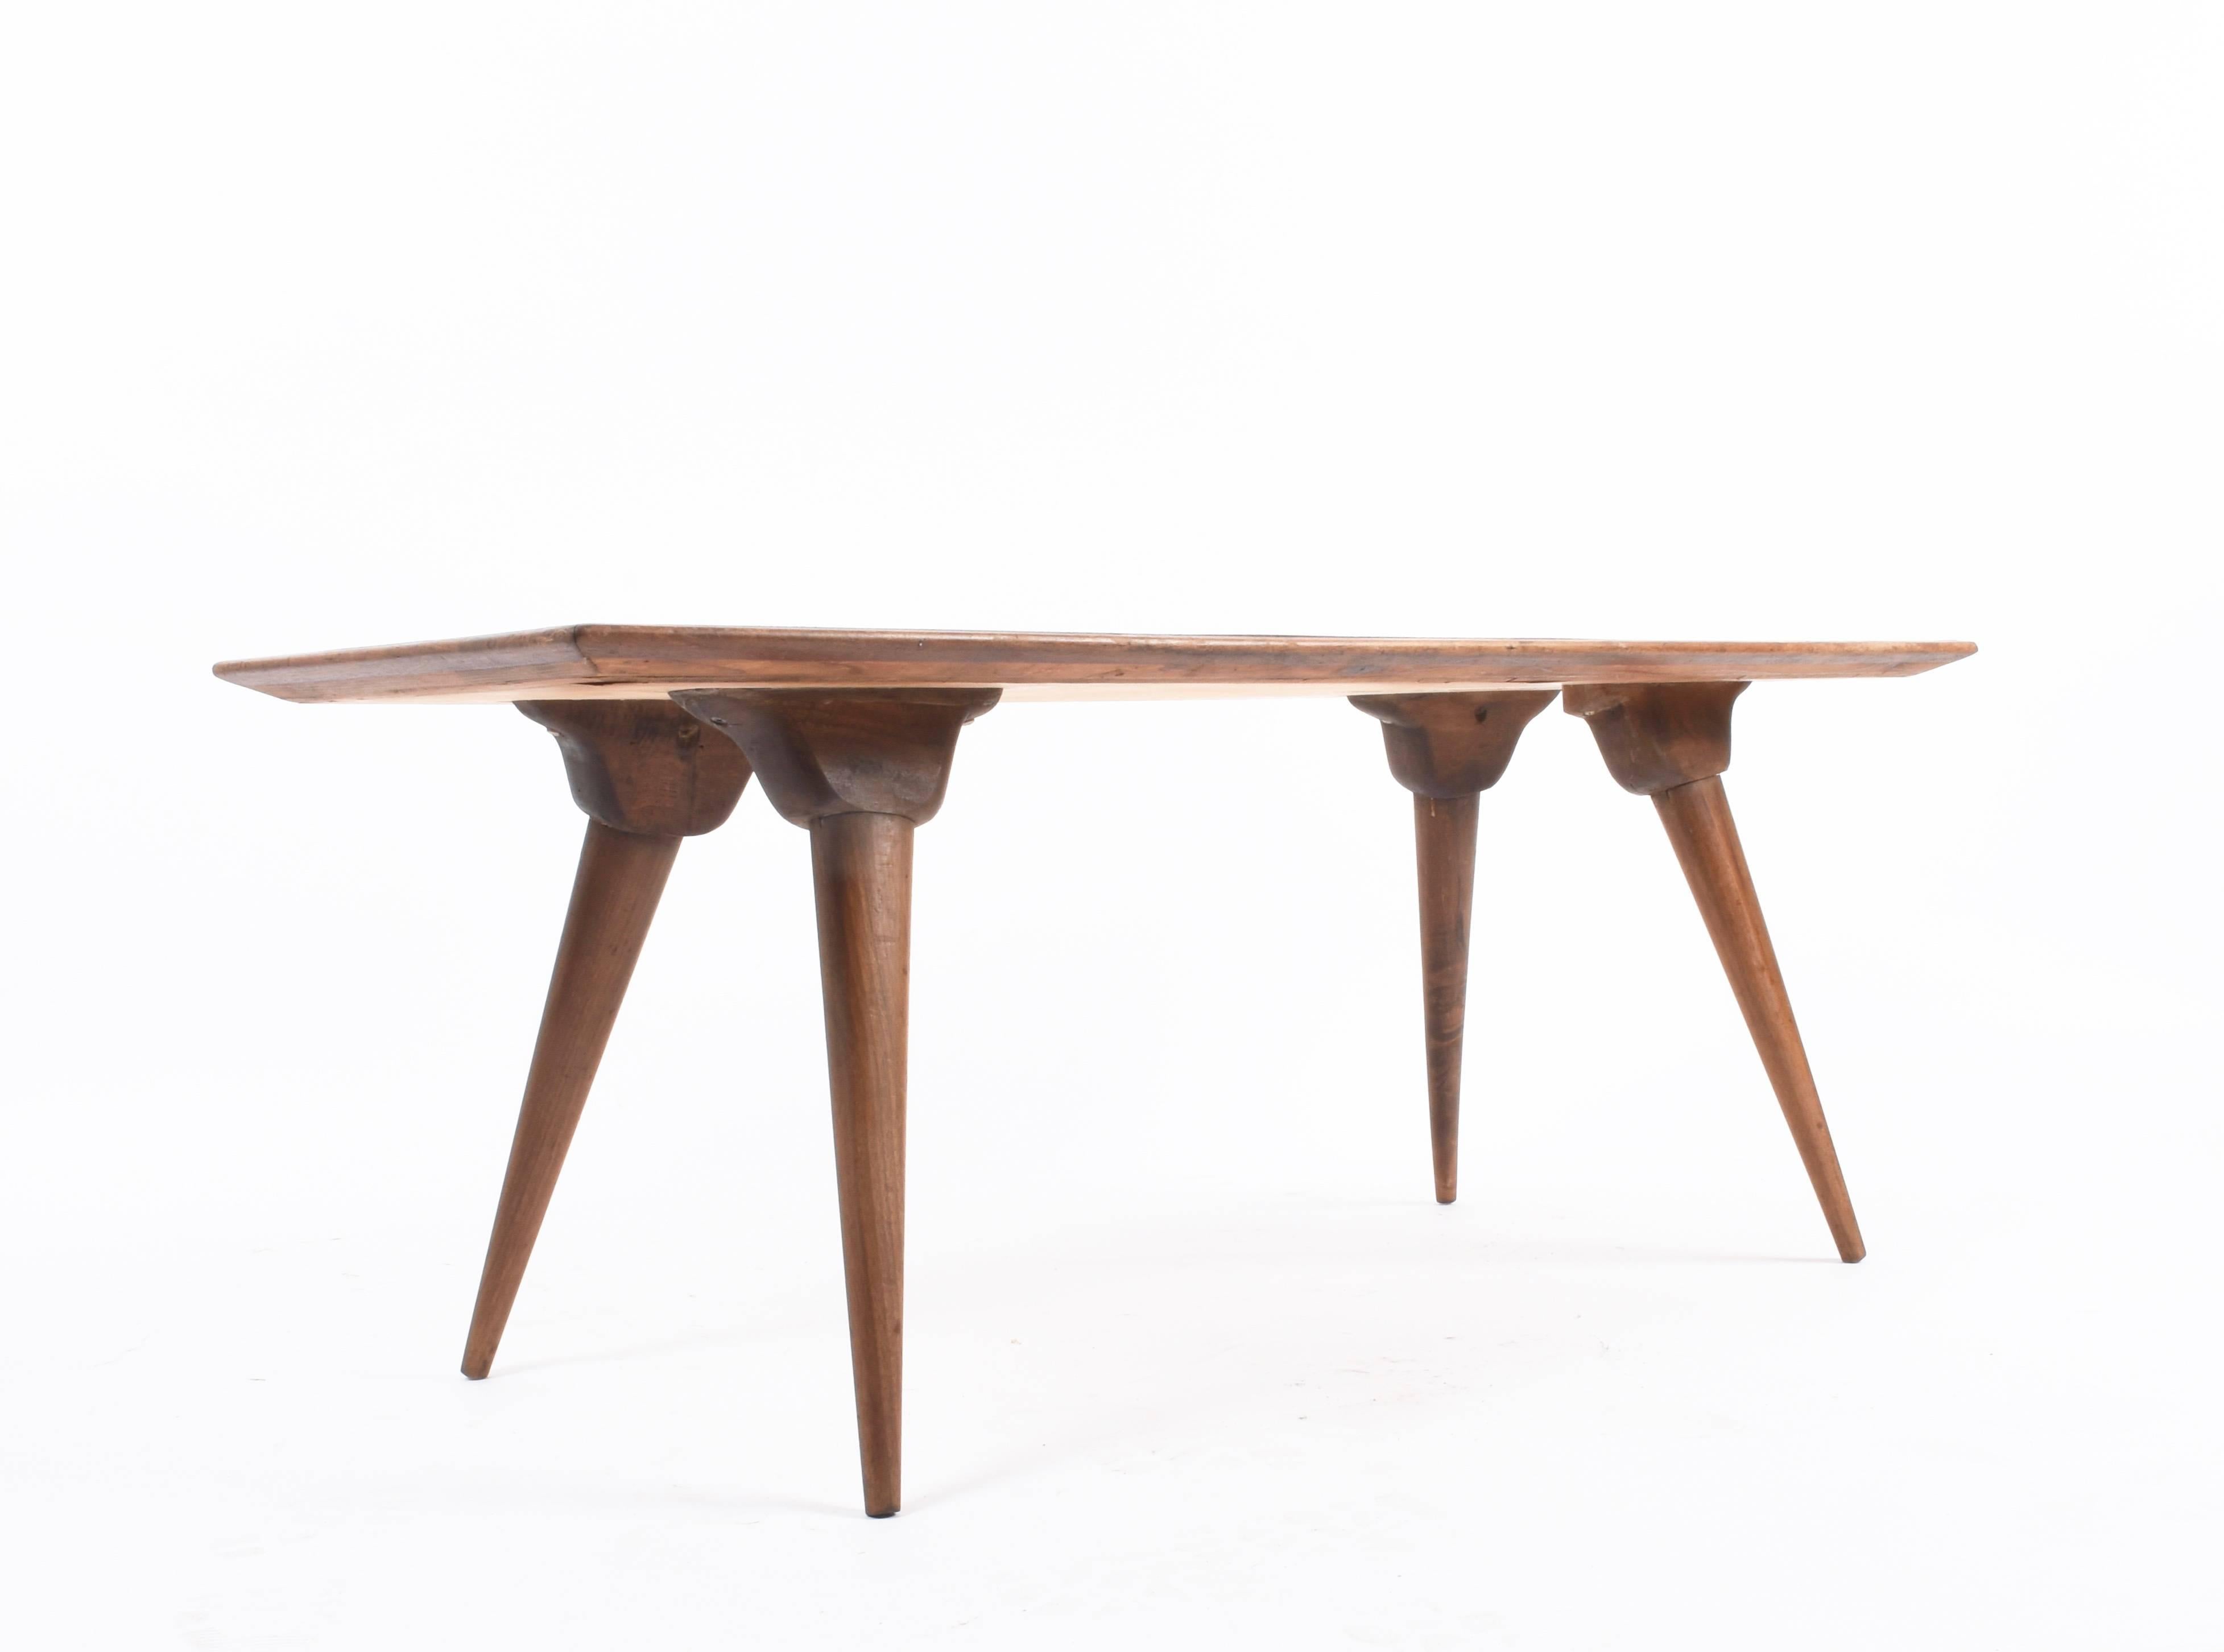 Midcentury Printed Wood and Plastic Italian Coffee Table after De Poli, 1950s For Sale 8